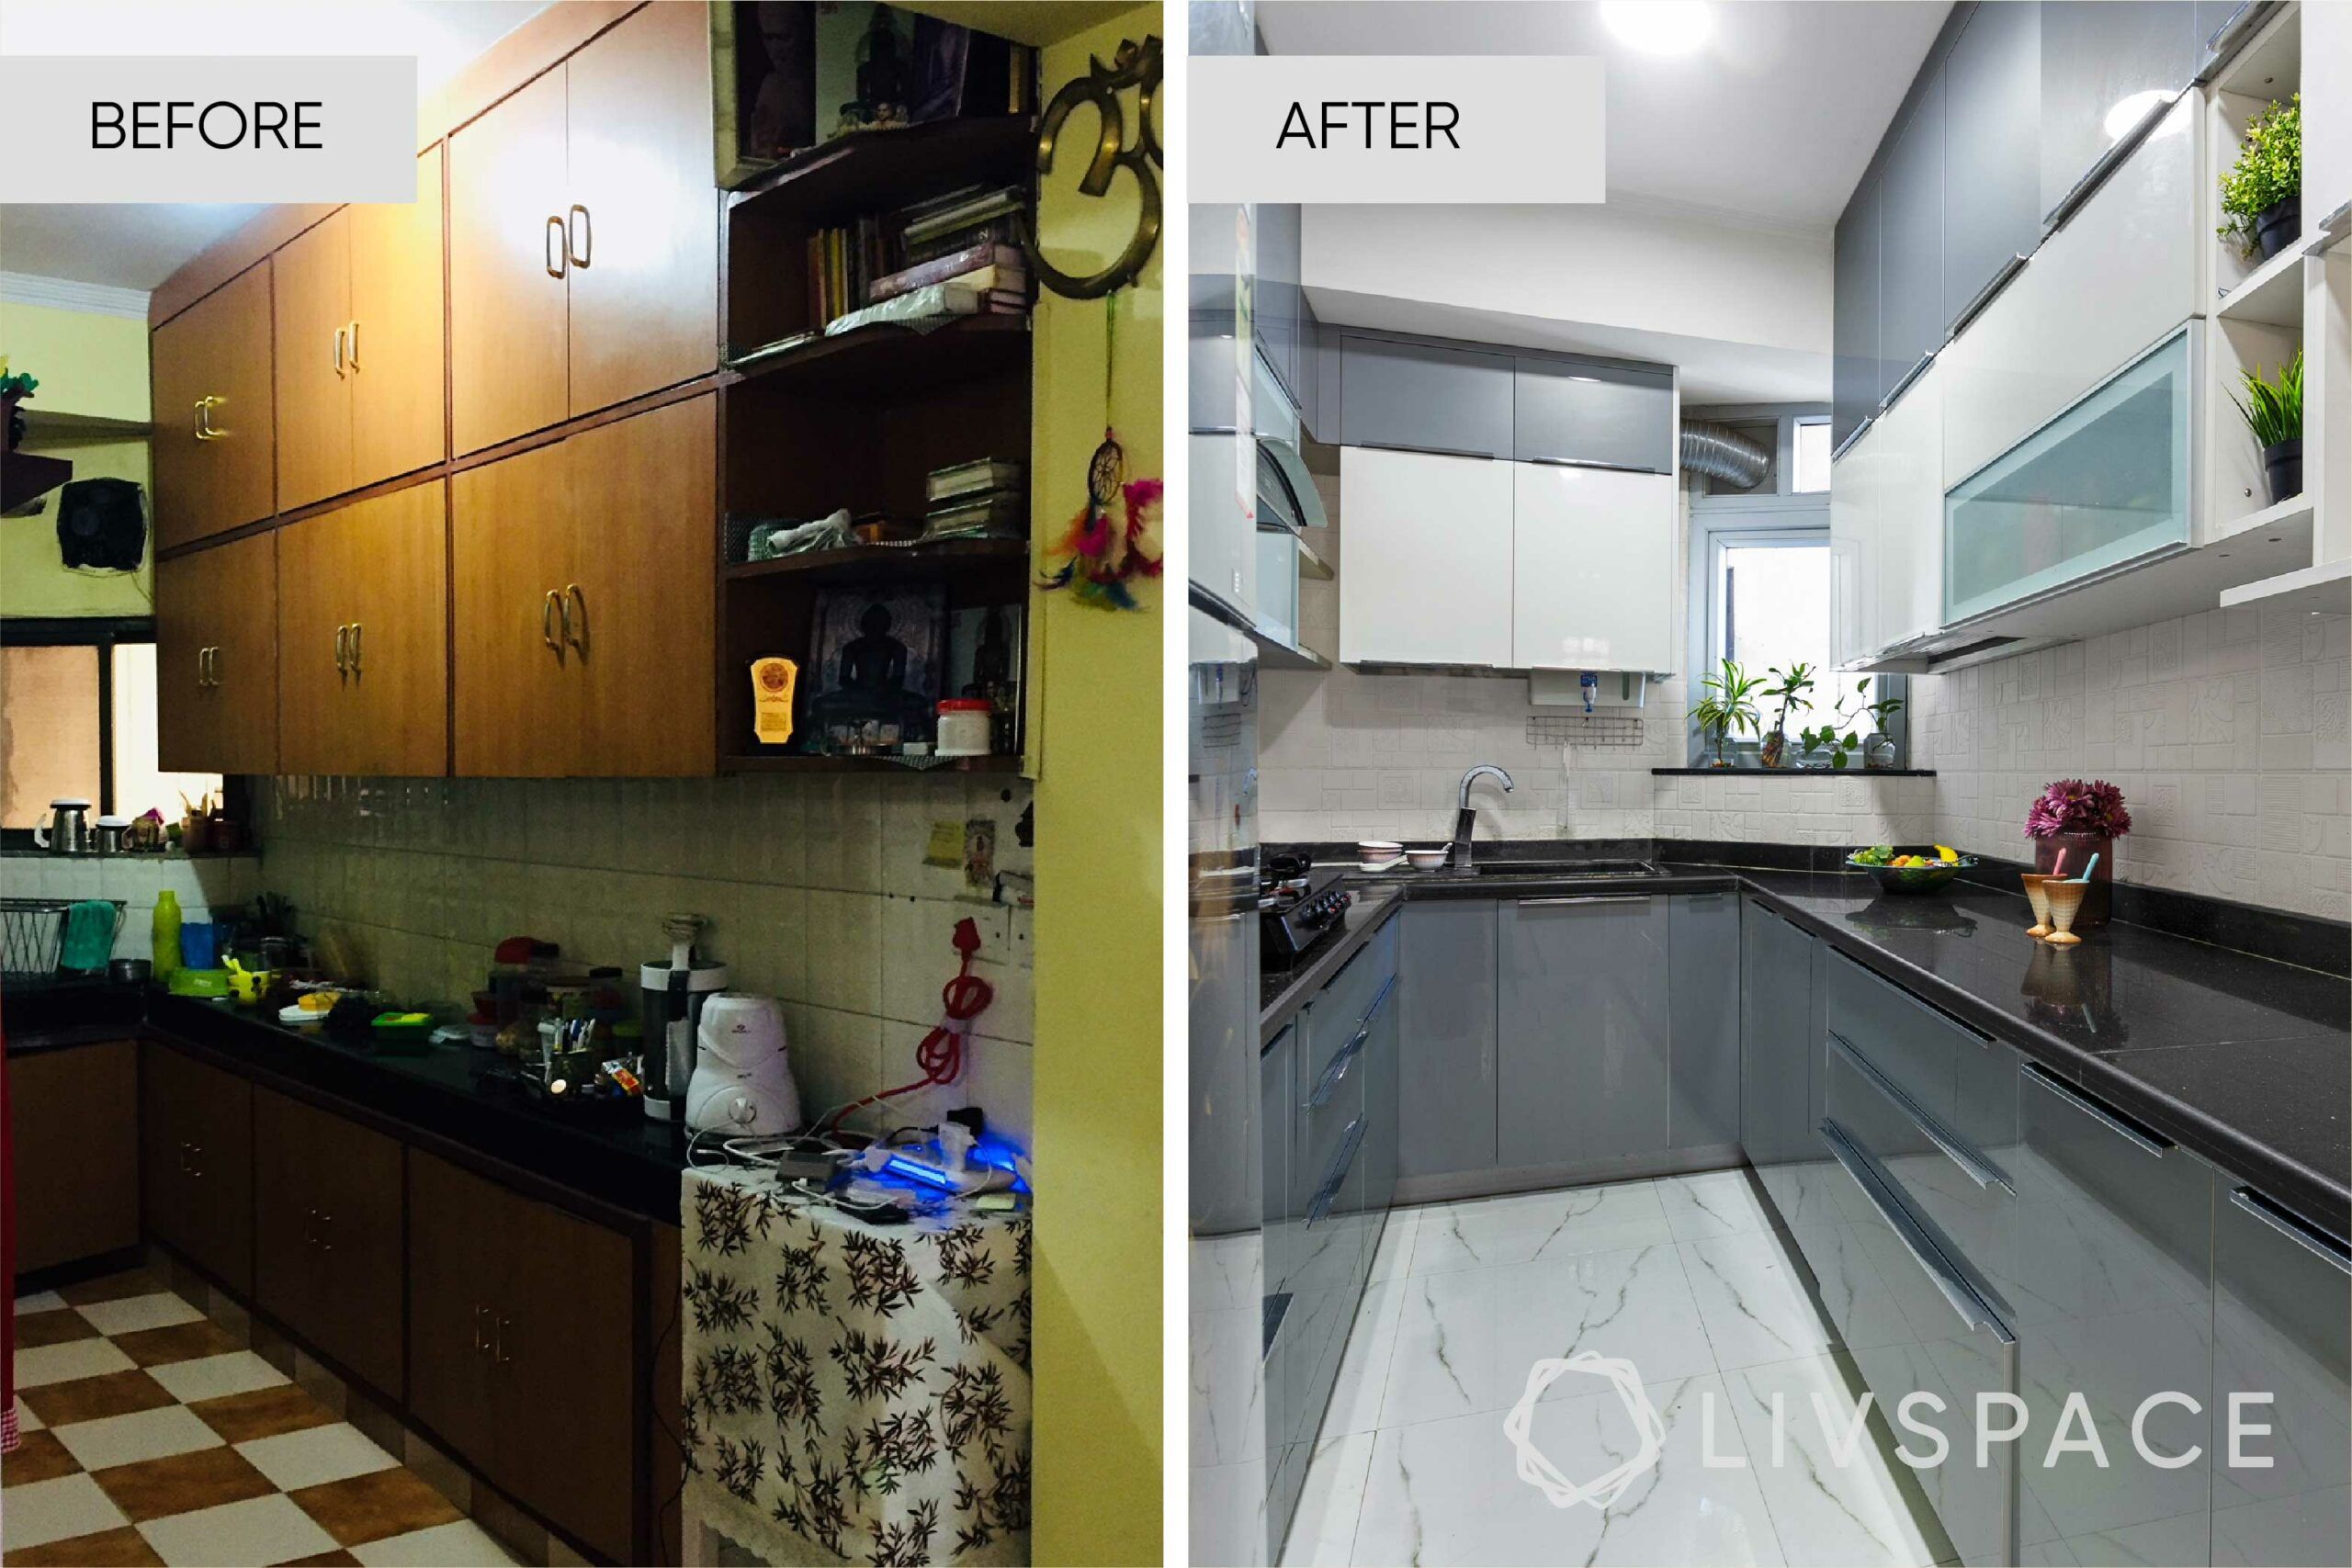 4-bhk-house-design-before-after-outside-kitchen 